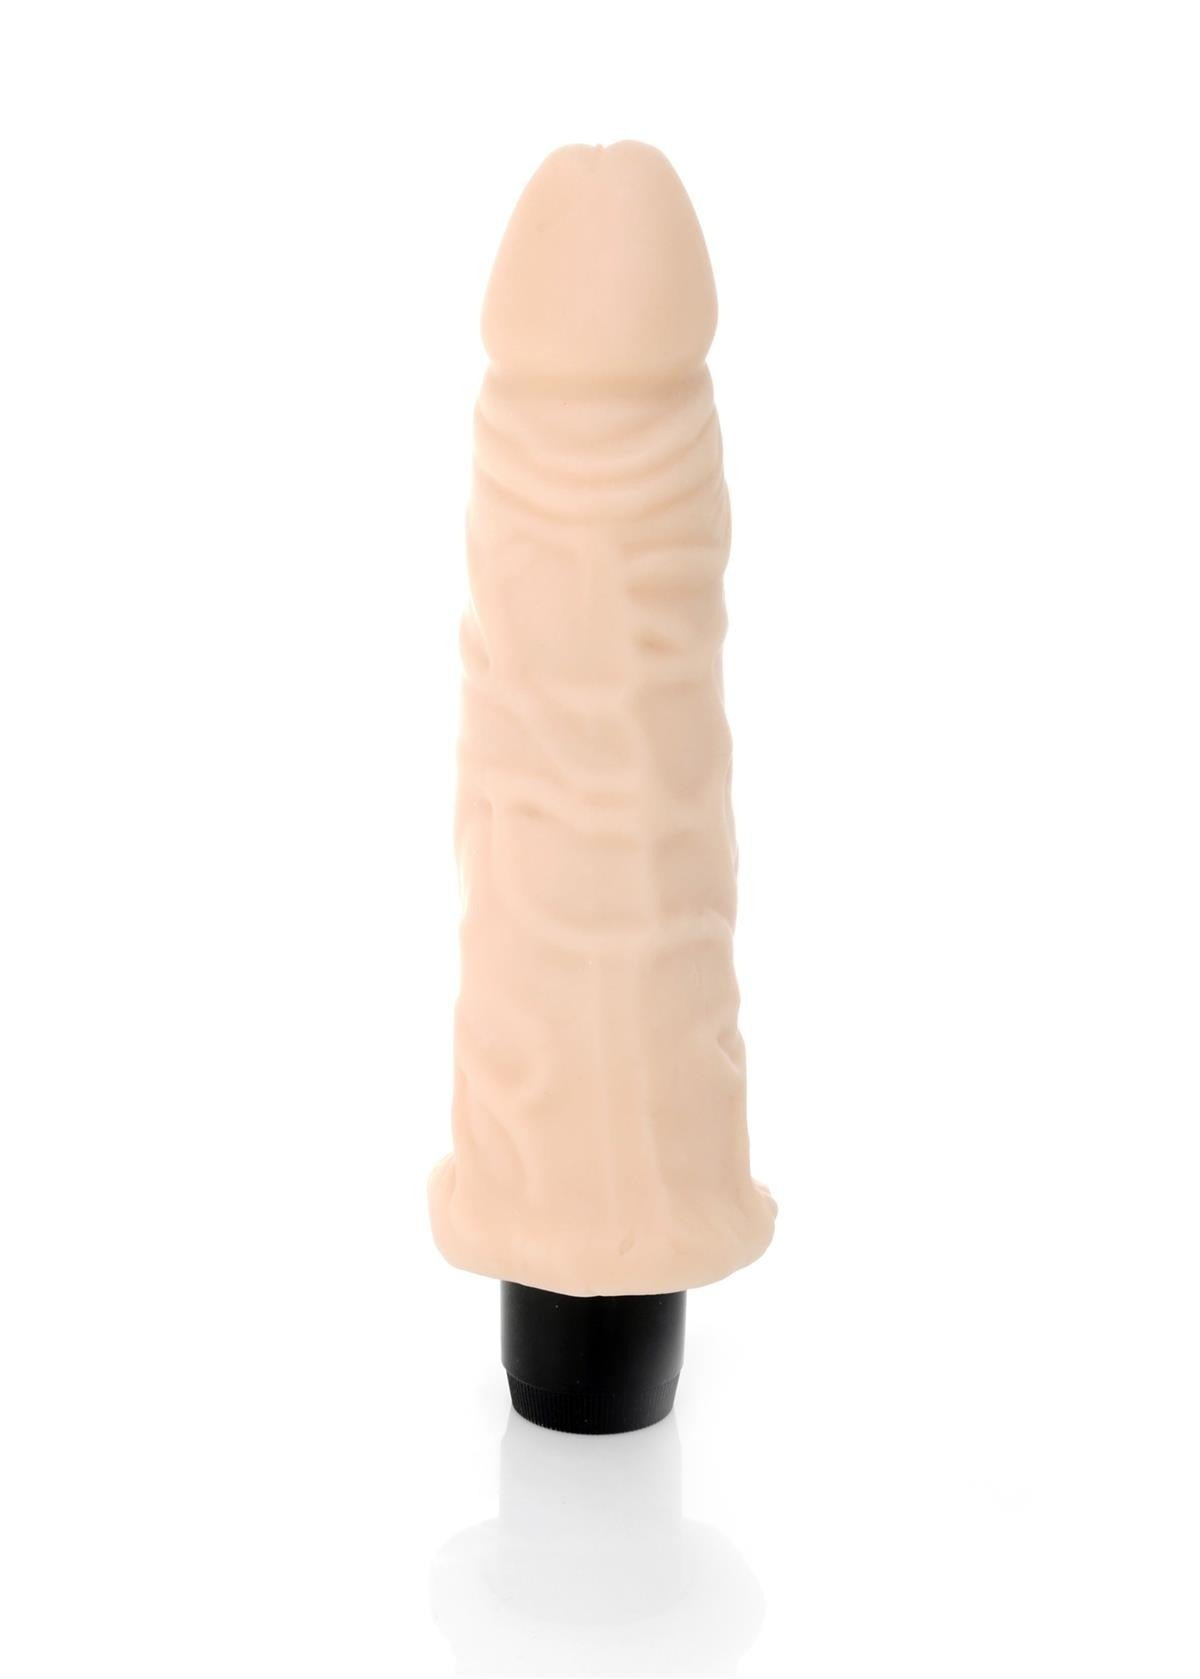 Bossoftoys Drizzle Realistic vibrator - Cyber leather - Extra ordinary Flexible Material - Flesh - 19 cm - 44-00005